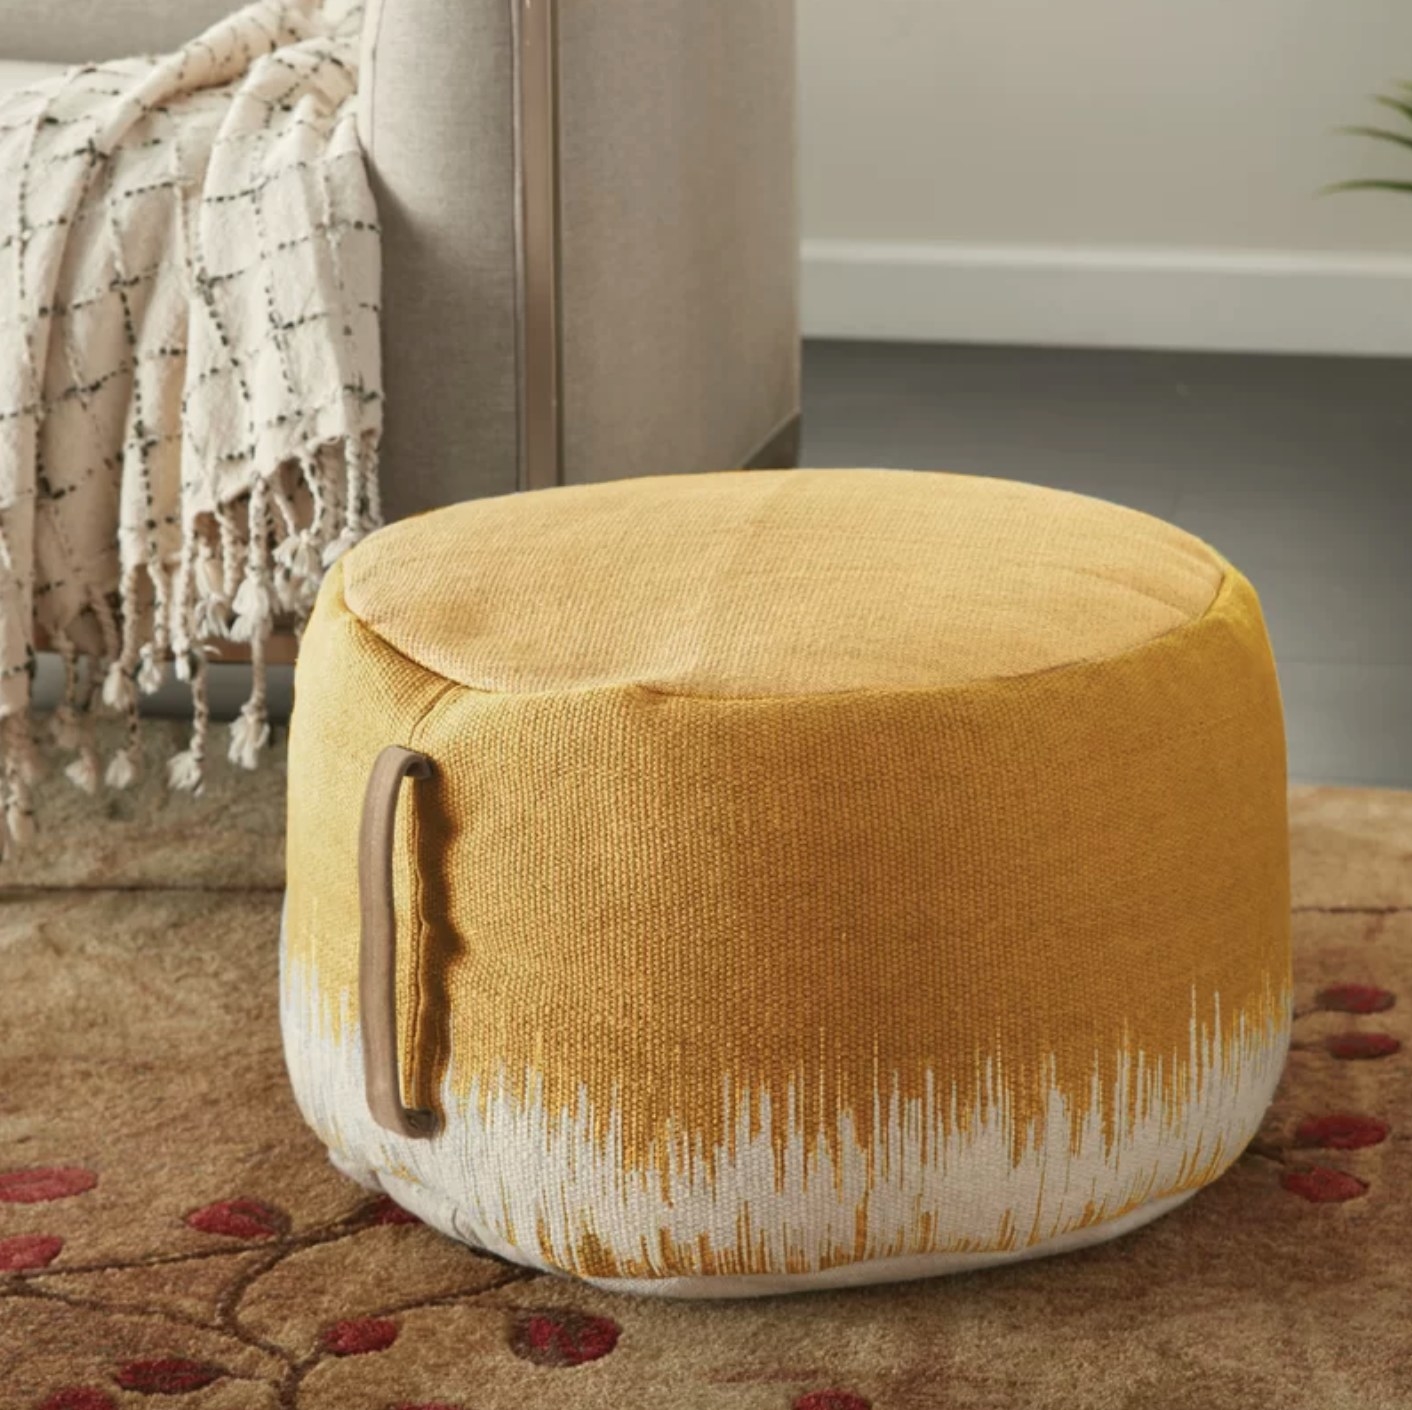 The ottoman pouf in mustard